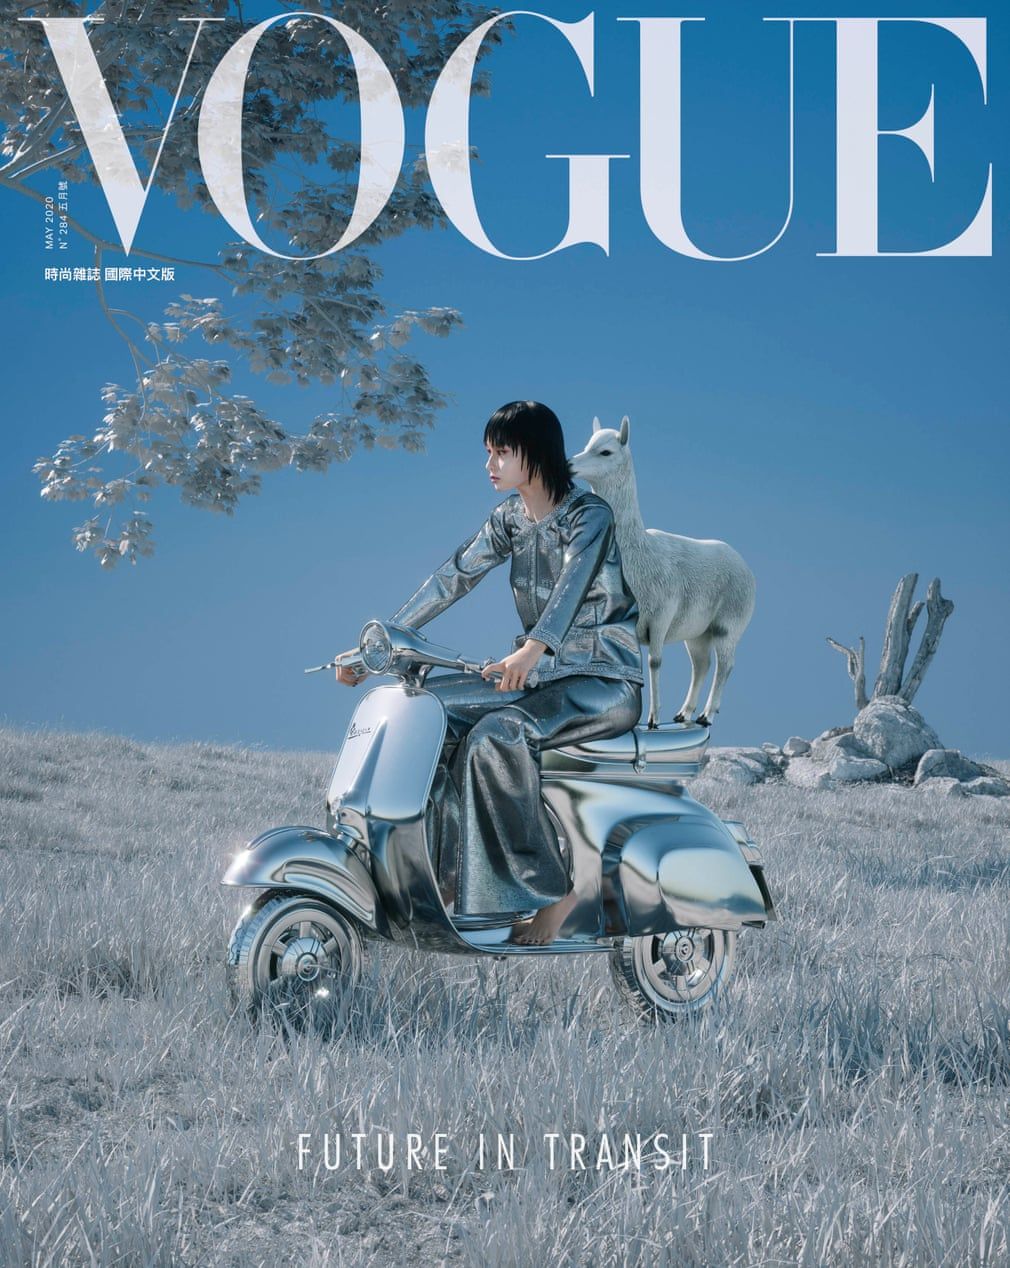 Vogue Taiwan's CGI magazine cover for May 2020 (Photo credit: Conde Nast)